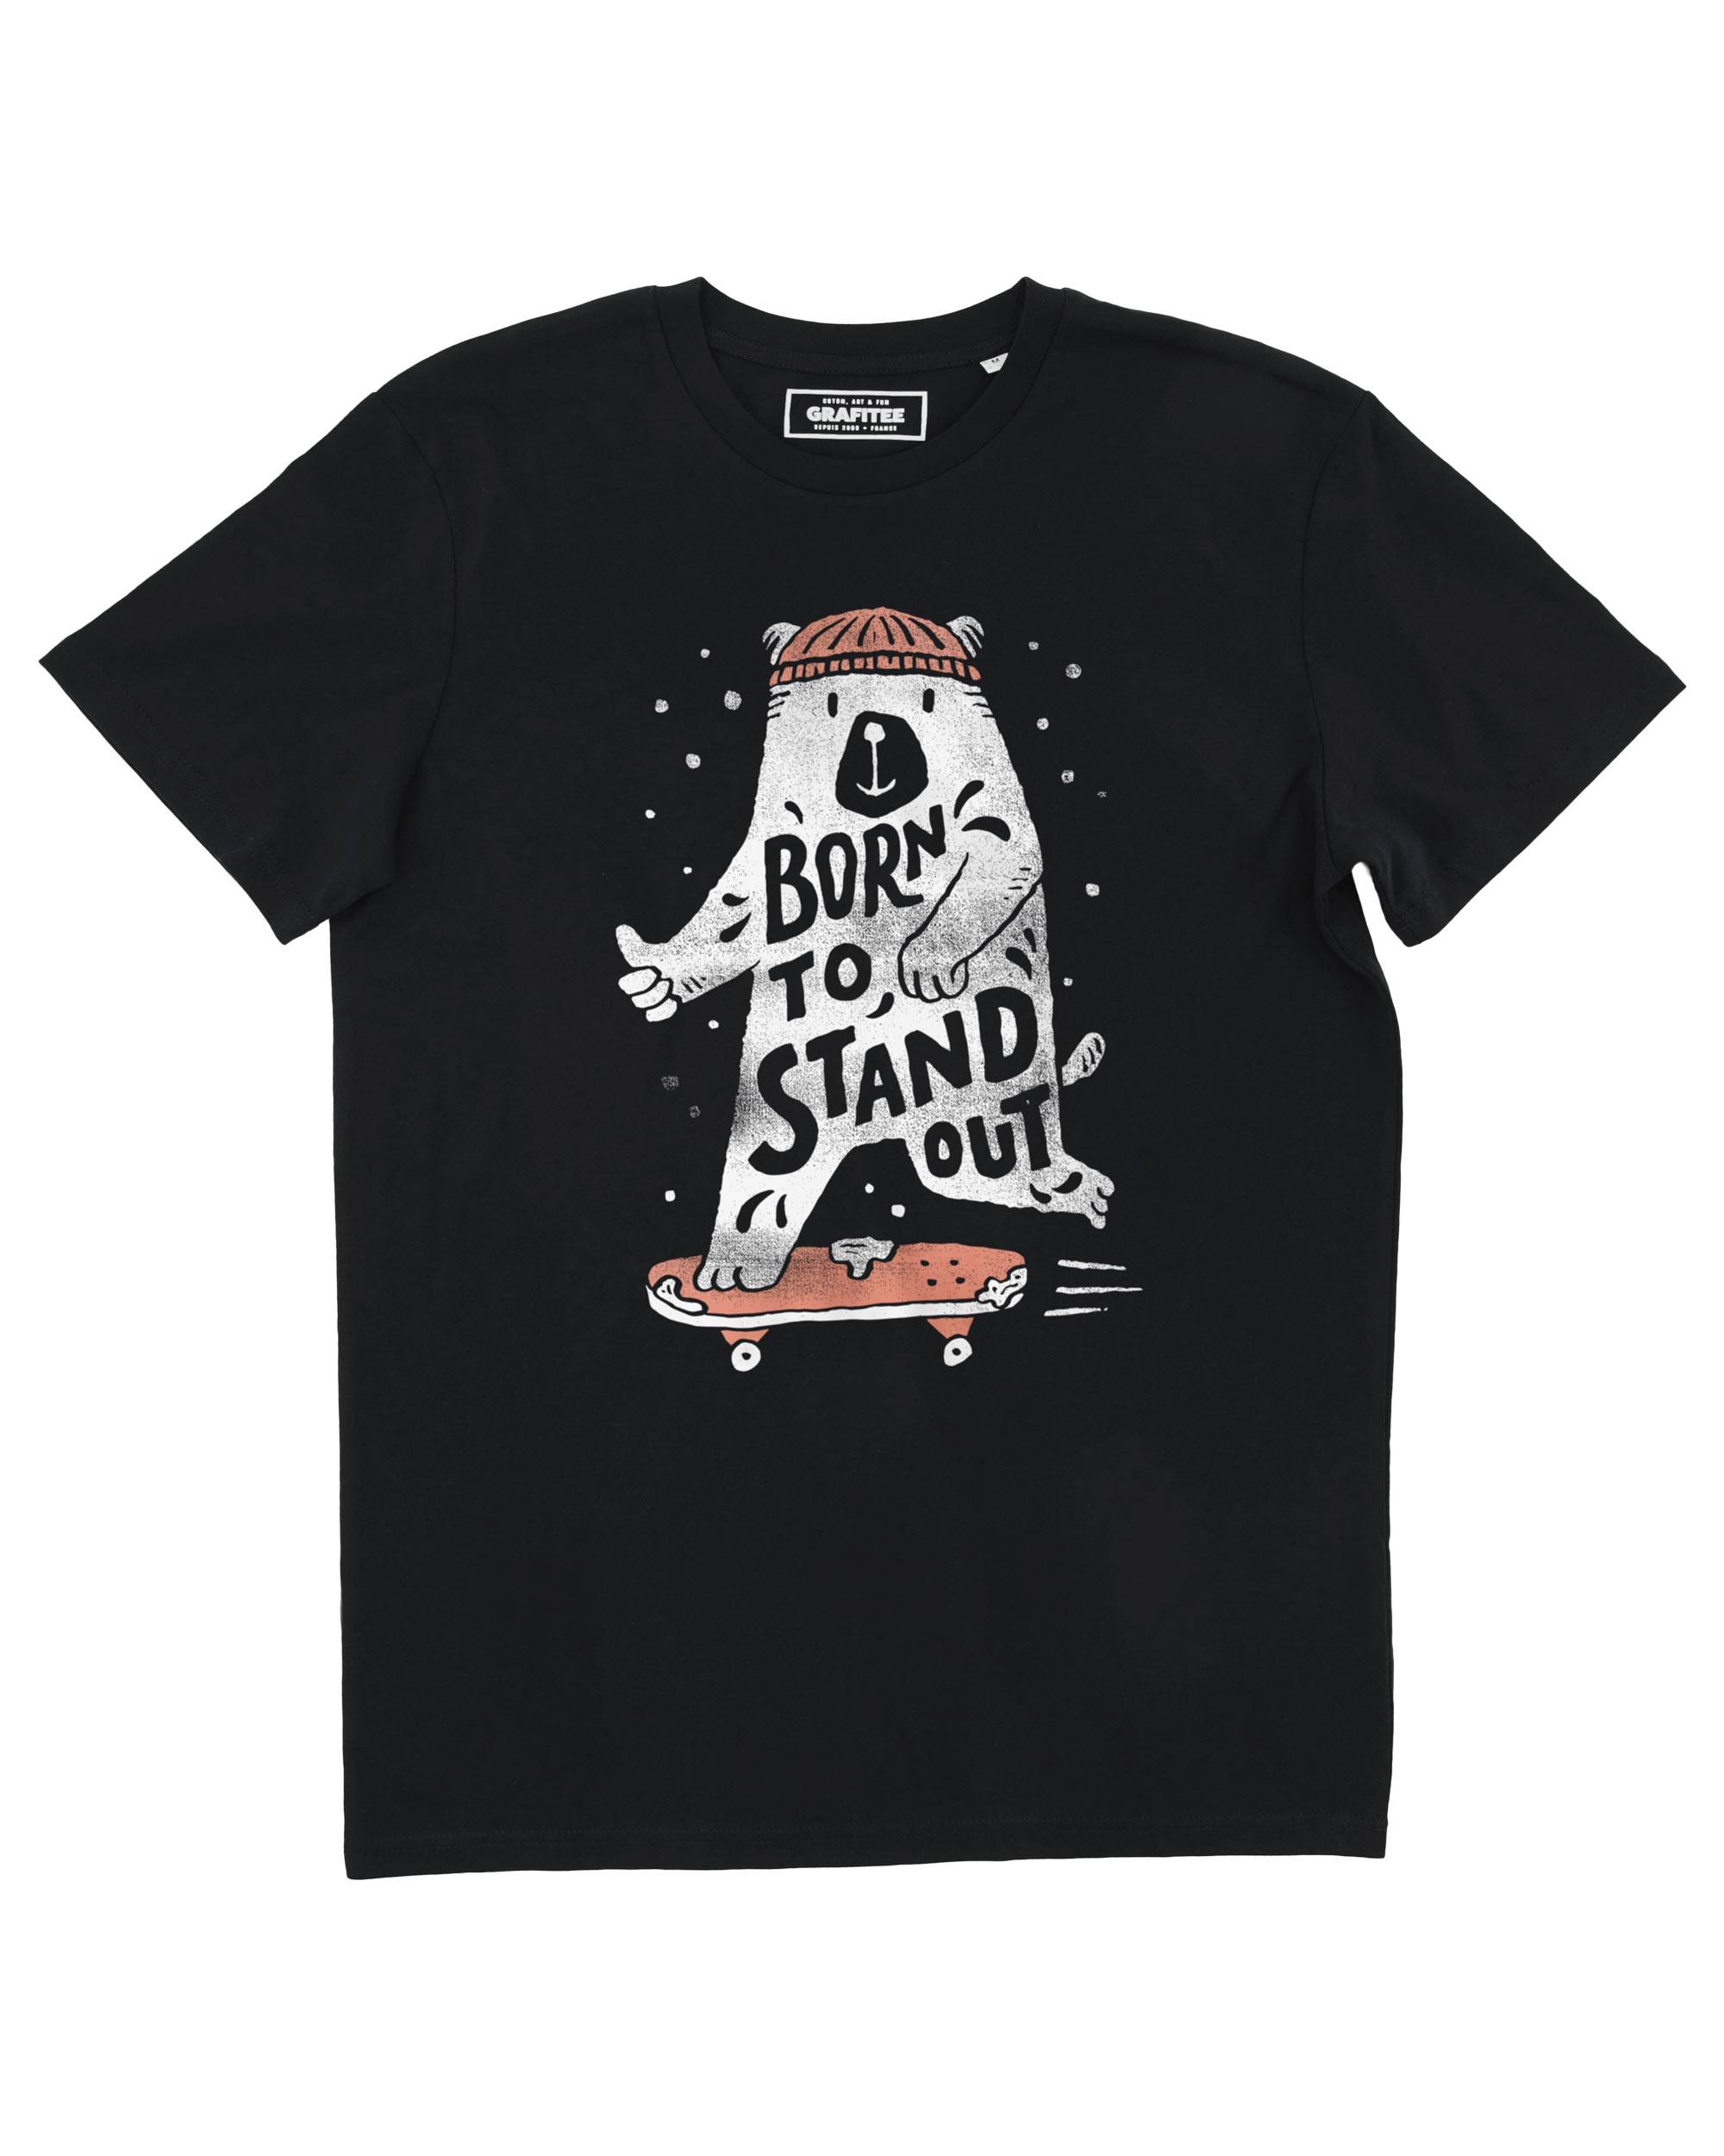 T-shirt Born to stand out Grafitee